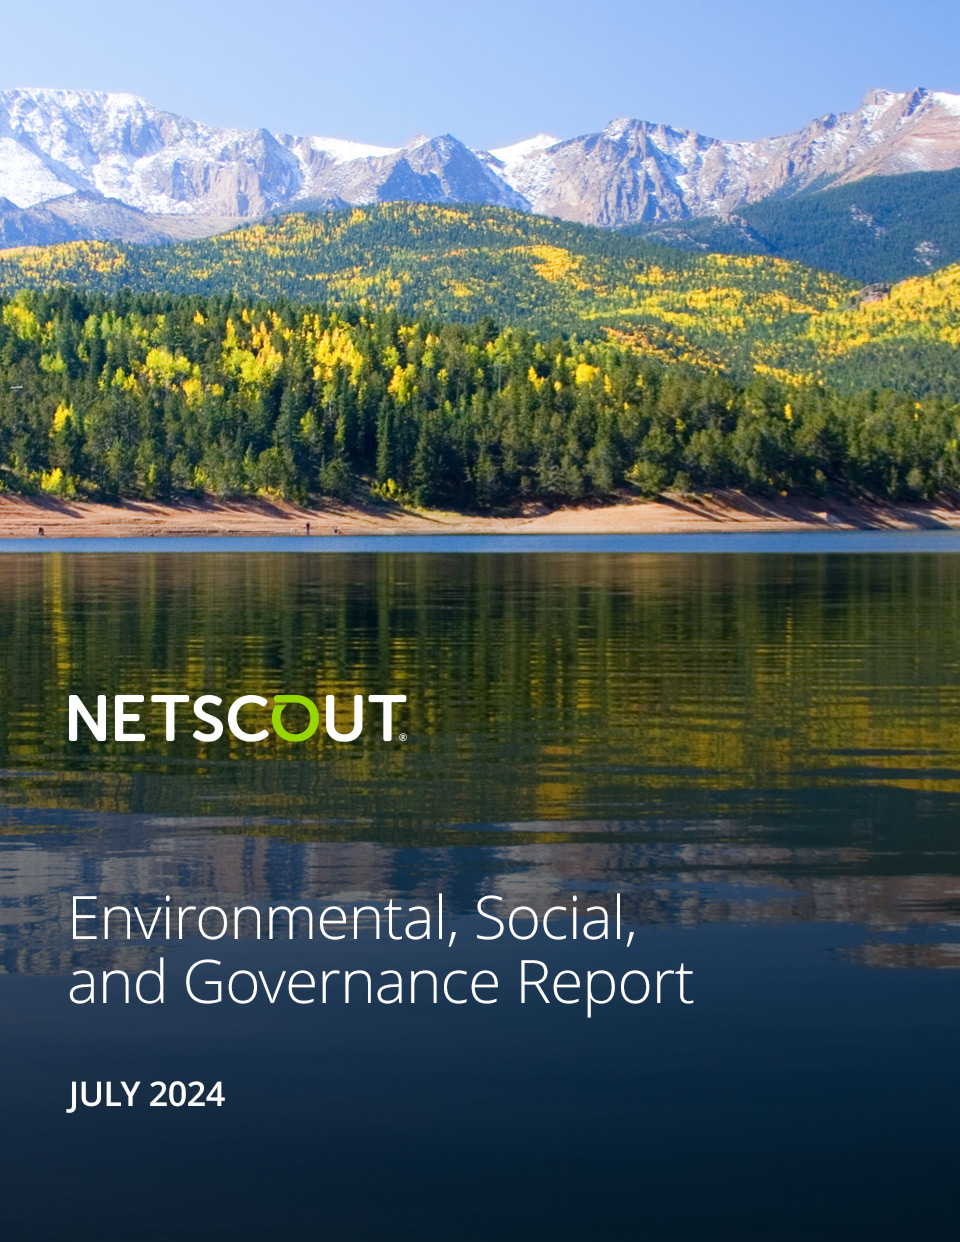 NETSCOUT Environmental, Social, and Governance Report July 2024